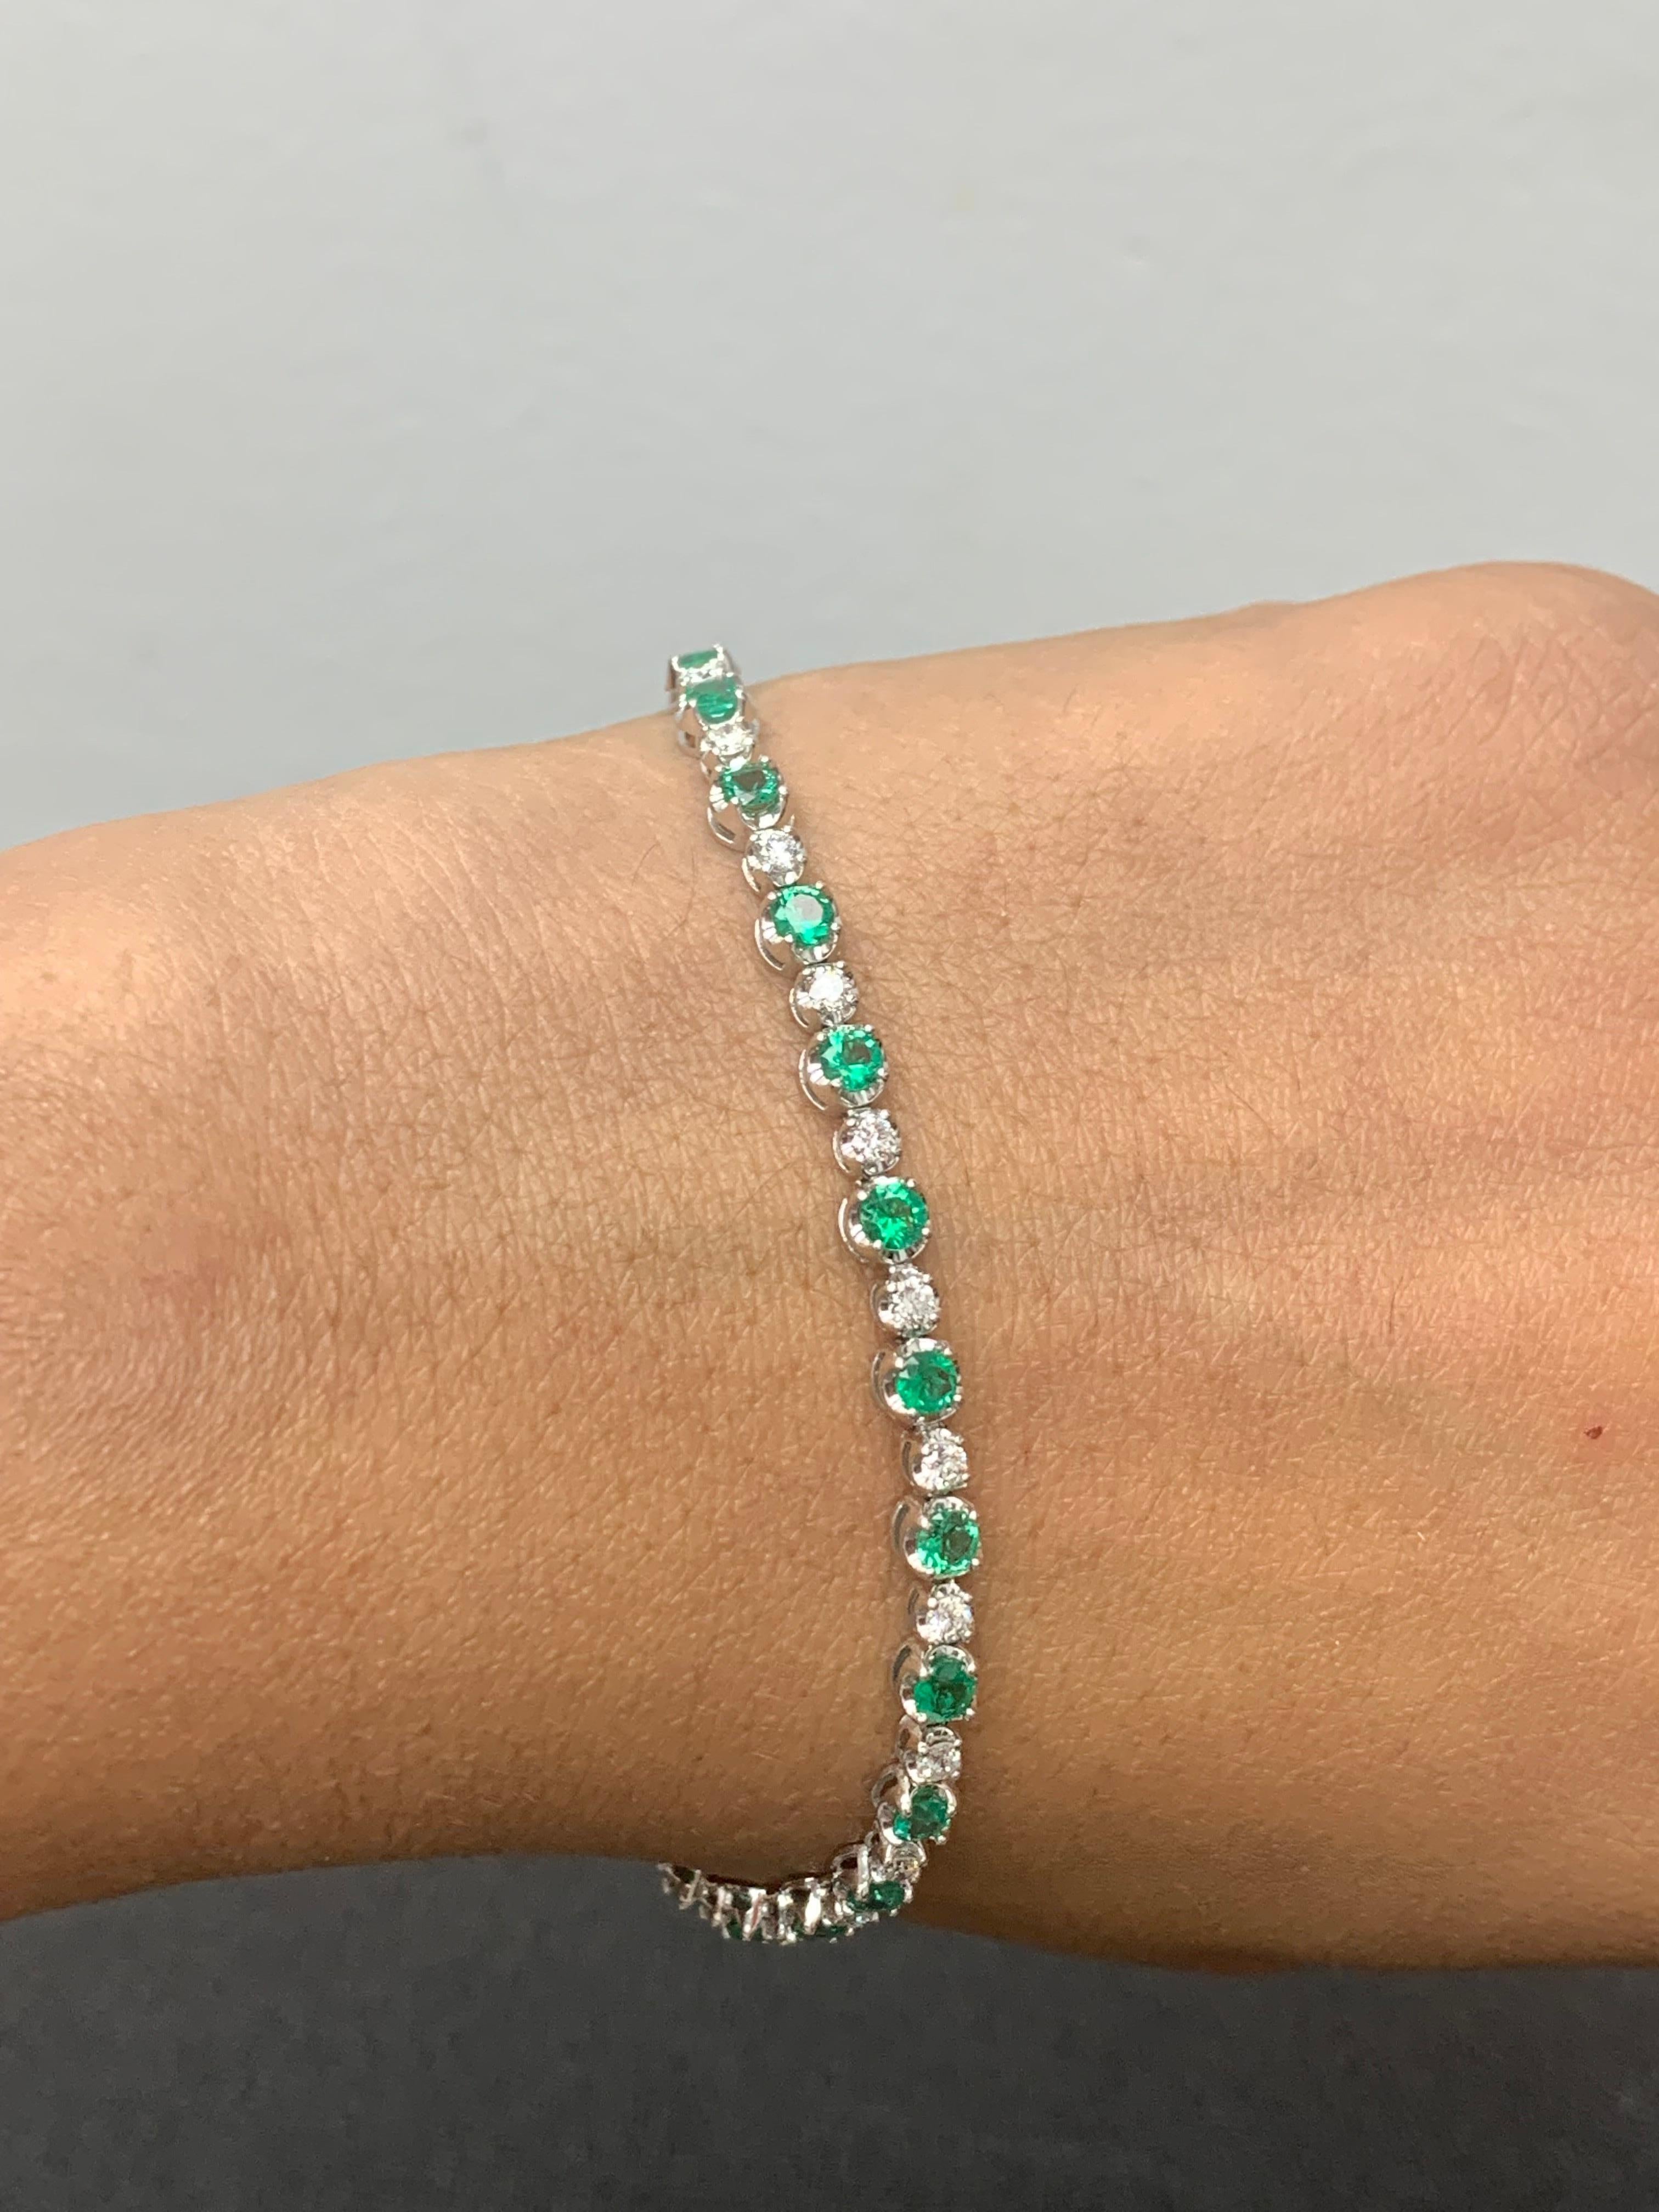 A stunning bracelet set with 23 Lush Green Emeralds weighing 3.42 carats total. Alternating these emeralds are 25 sparkling round diamonds weighing 1.15 carats in total. Set in polished 14k white gold. Double lock mechanism for maximum security. A